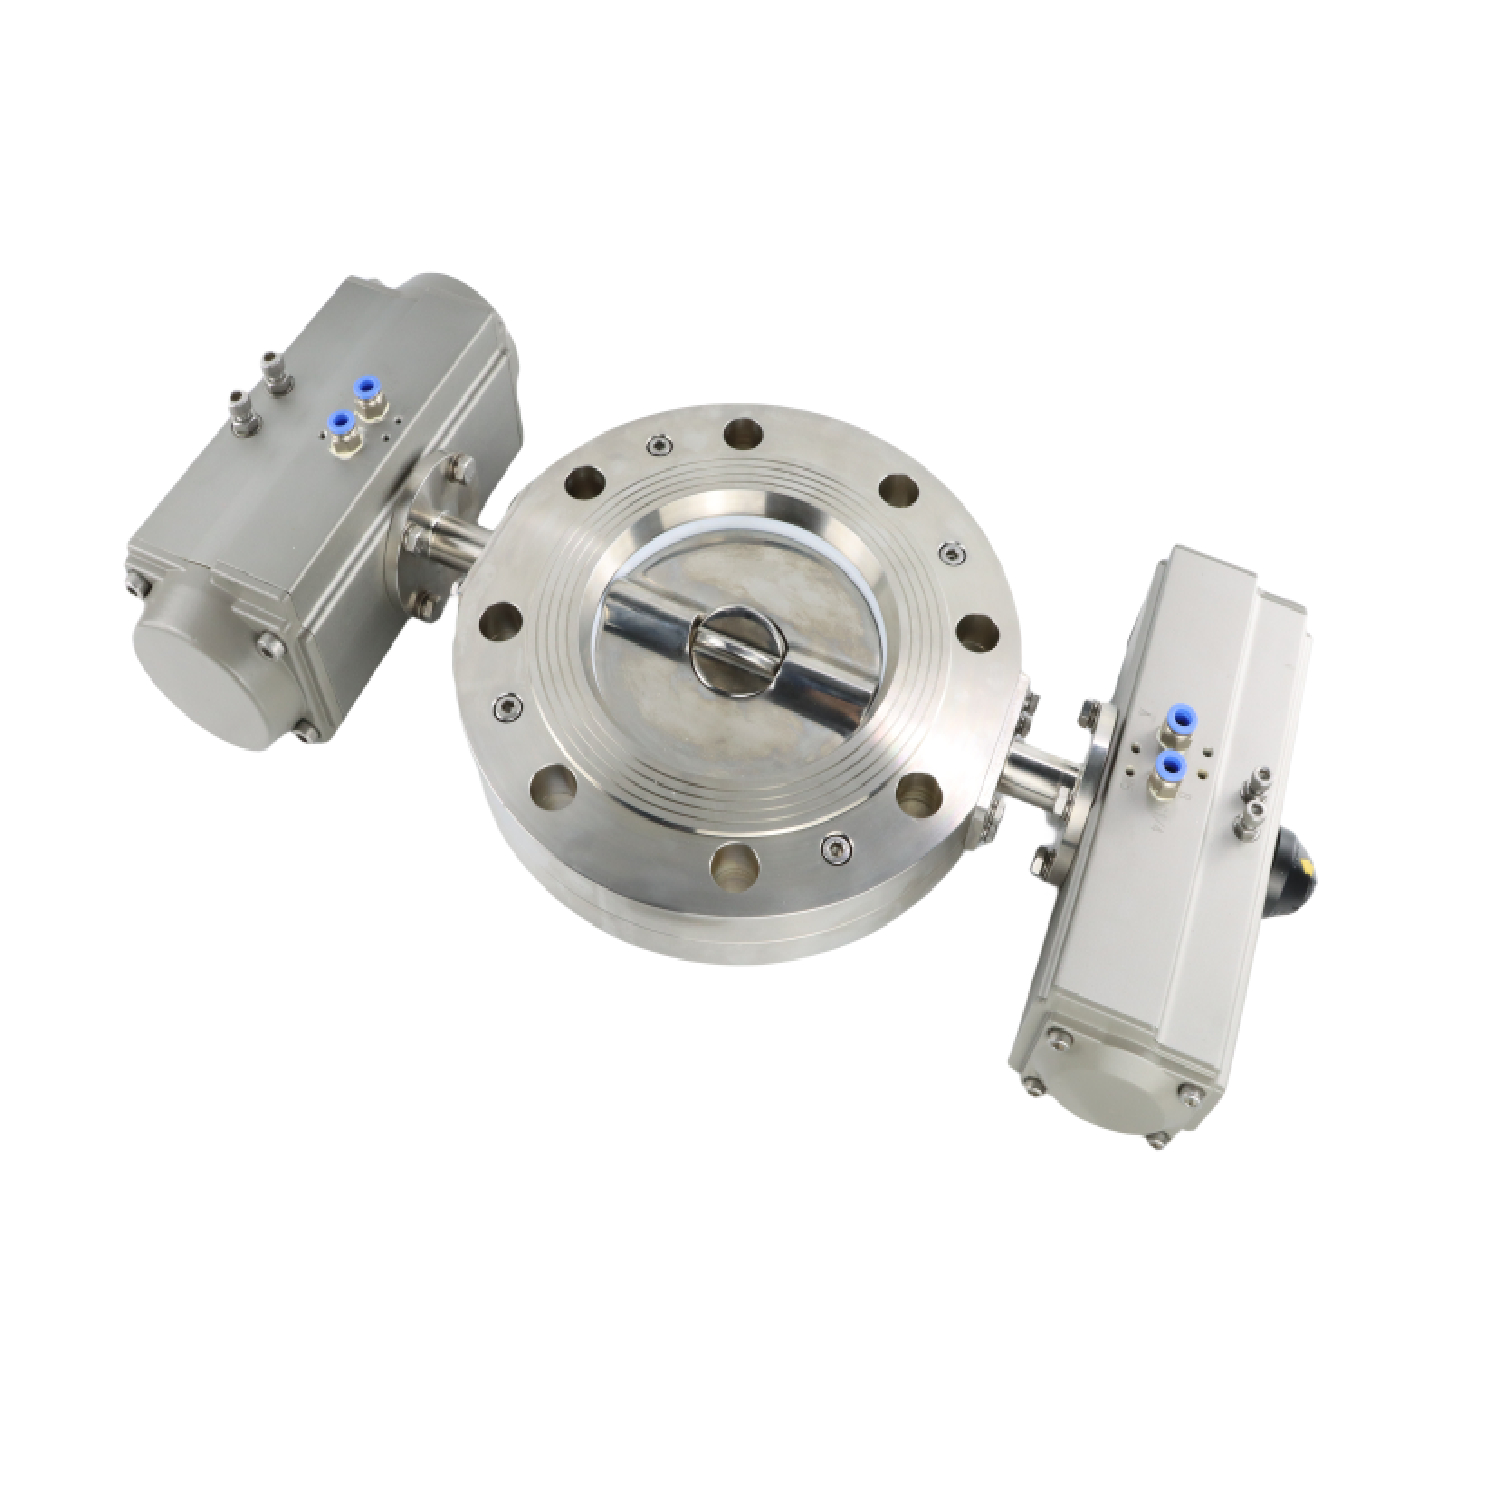 SS304 Hygienic Grade JN-XW 23 1001 Double Dosing Buttefly Valve for Beverage